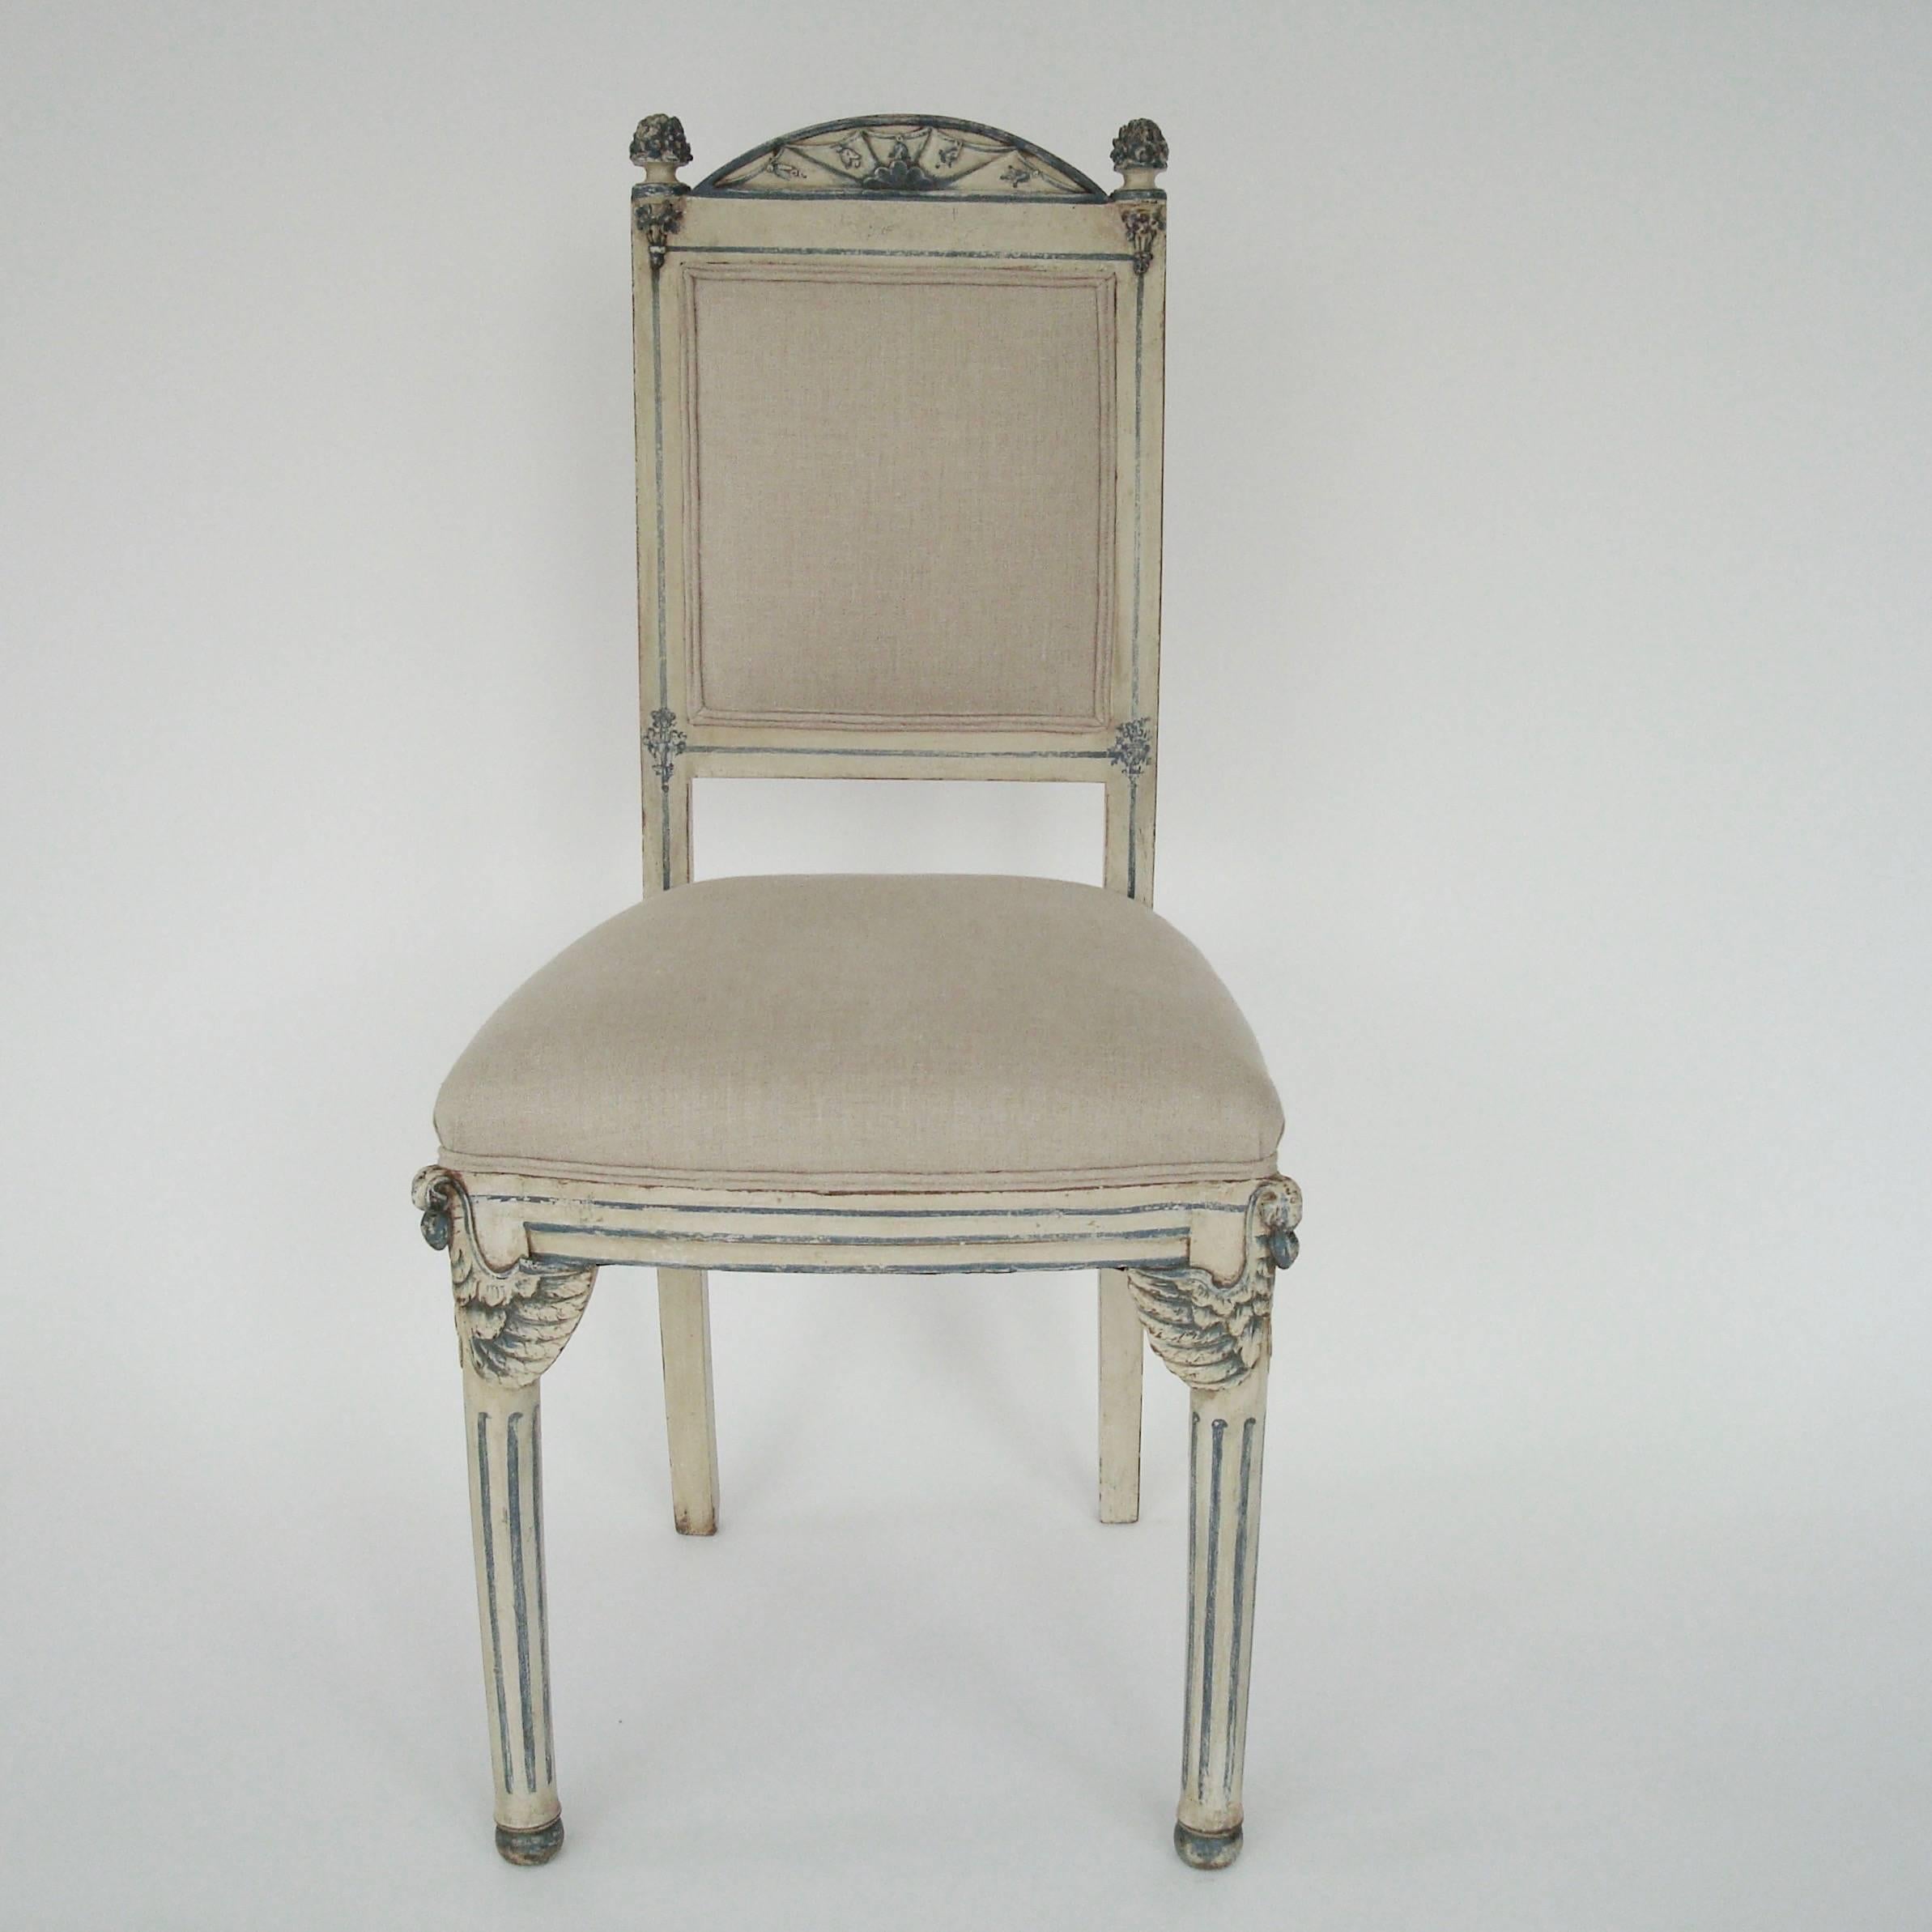 A pair of Italian Venetian side or dining chairs in white grayish paint with blue details. Stylized swans in blue at the tops of the legs, sunburst pattern at the top of the chair with finials. 
Upholstered in natural linen, 
circa 19th century.